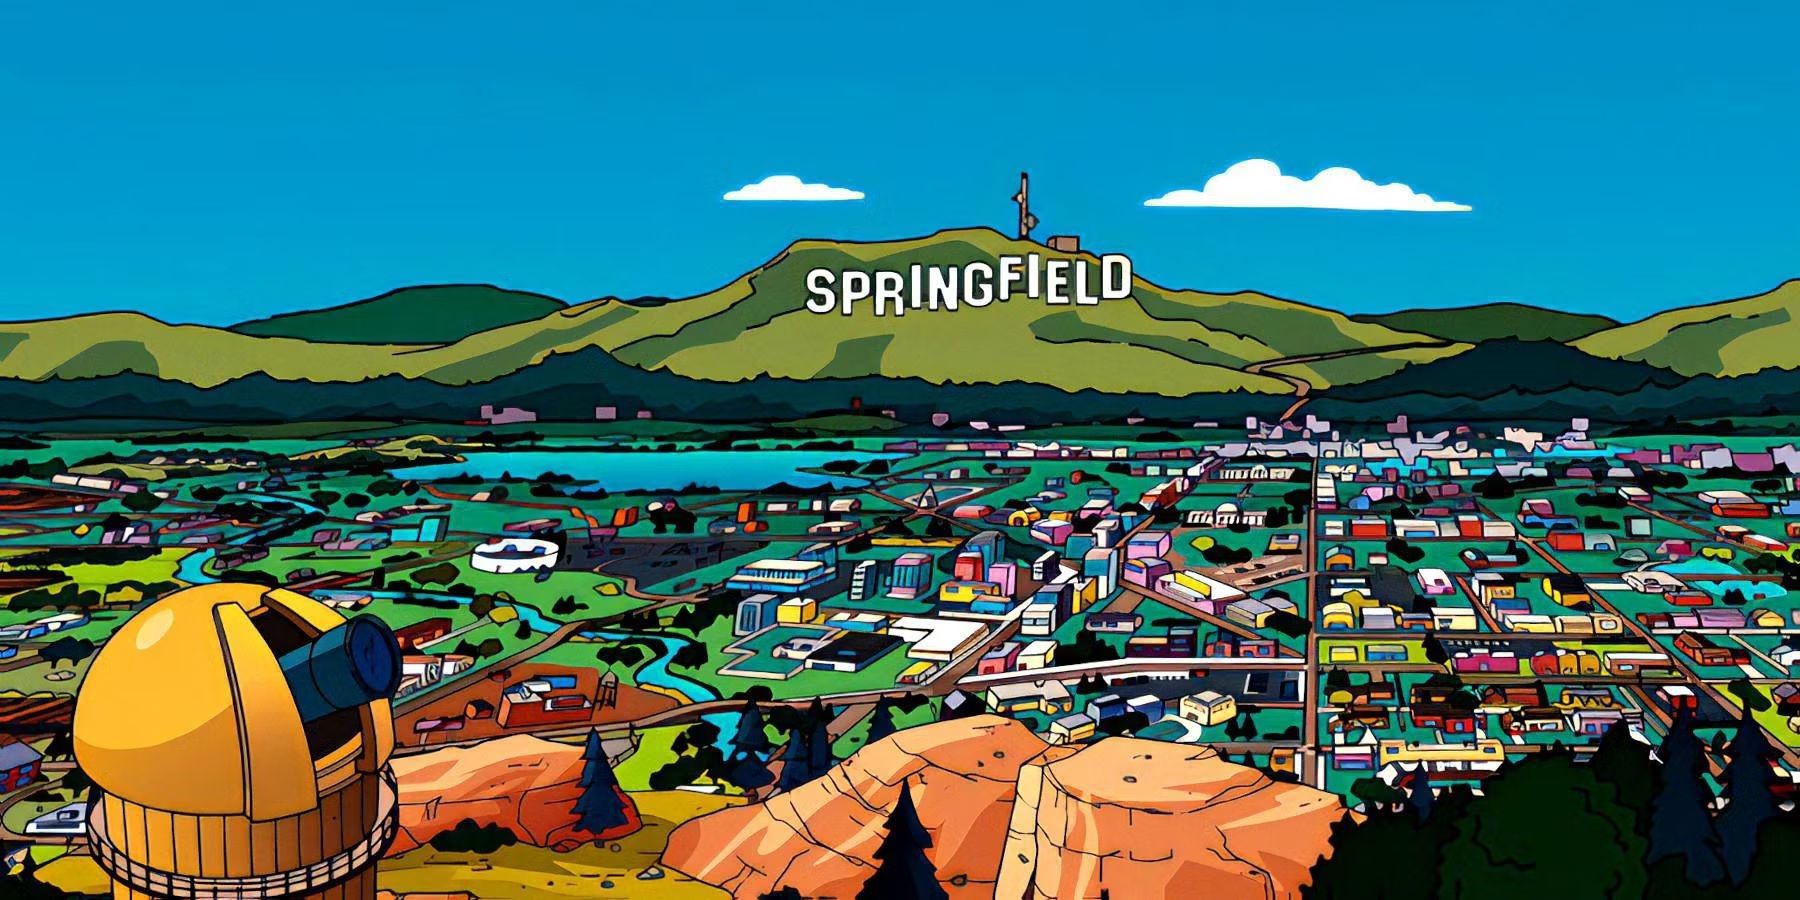 Springfield's skyline in The Simpsons